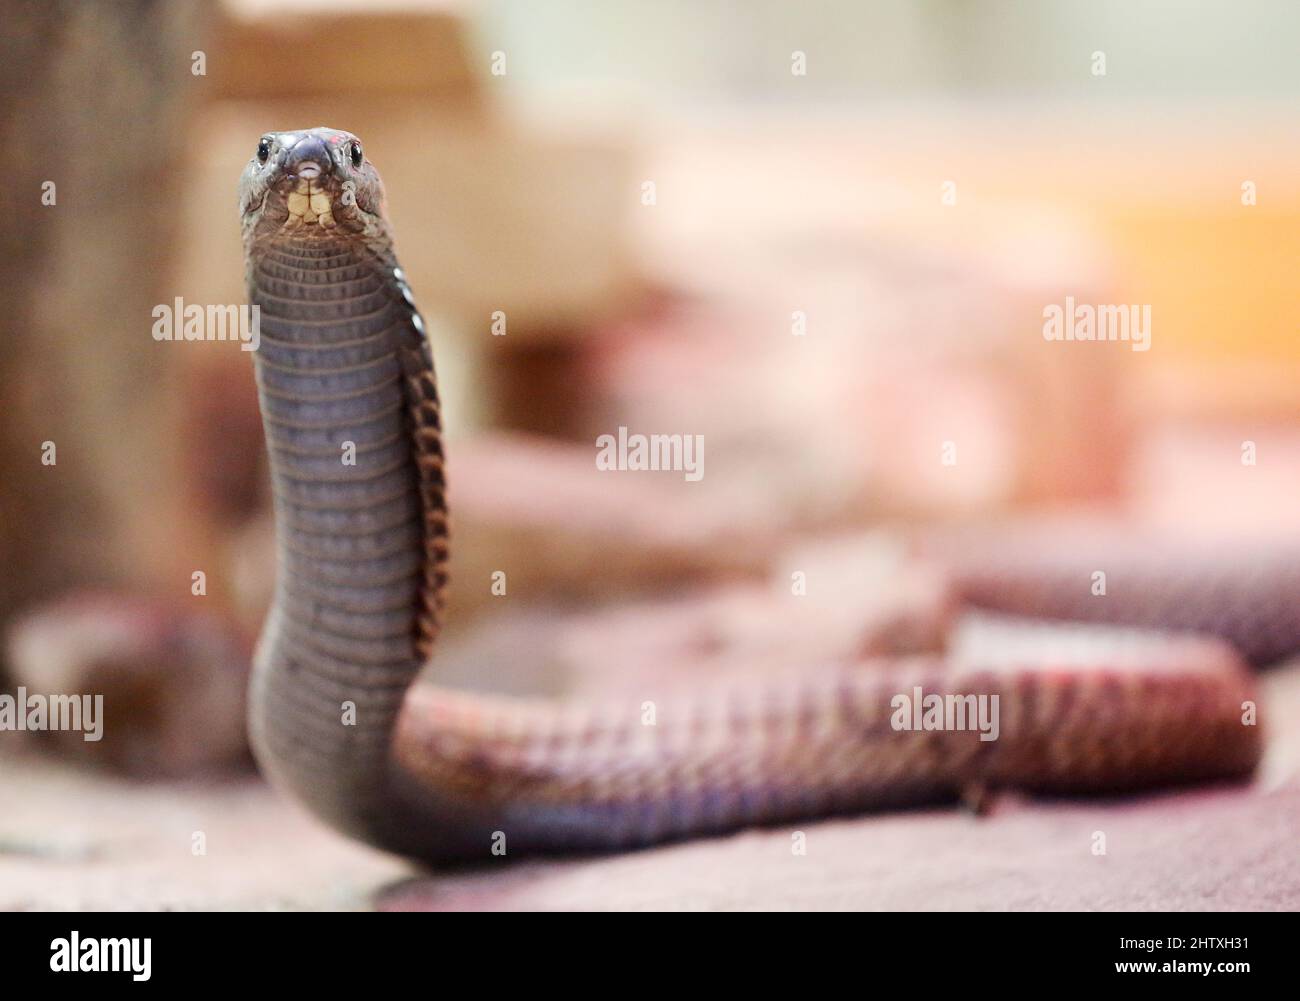 Rheinberg, Germany. 02nd Mar, 2022. A venomous Arabian cobra crawls through its terrarium at the Terrazoo. According to a recent report by the state government, a total of 4300 reported poisonous animals were living in 207 stock farms in North Rhine-Westphalia as of Dec. 31, 2021. Credit: Roland Weihrauch/dpa/Alamy Live News Stock Photo